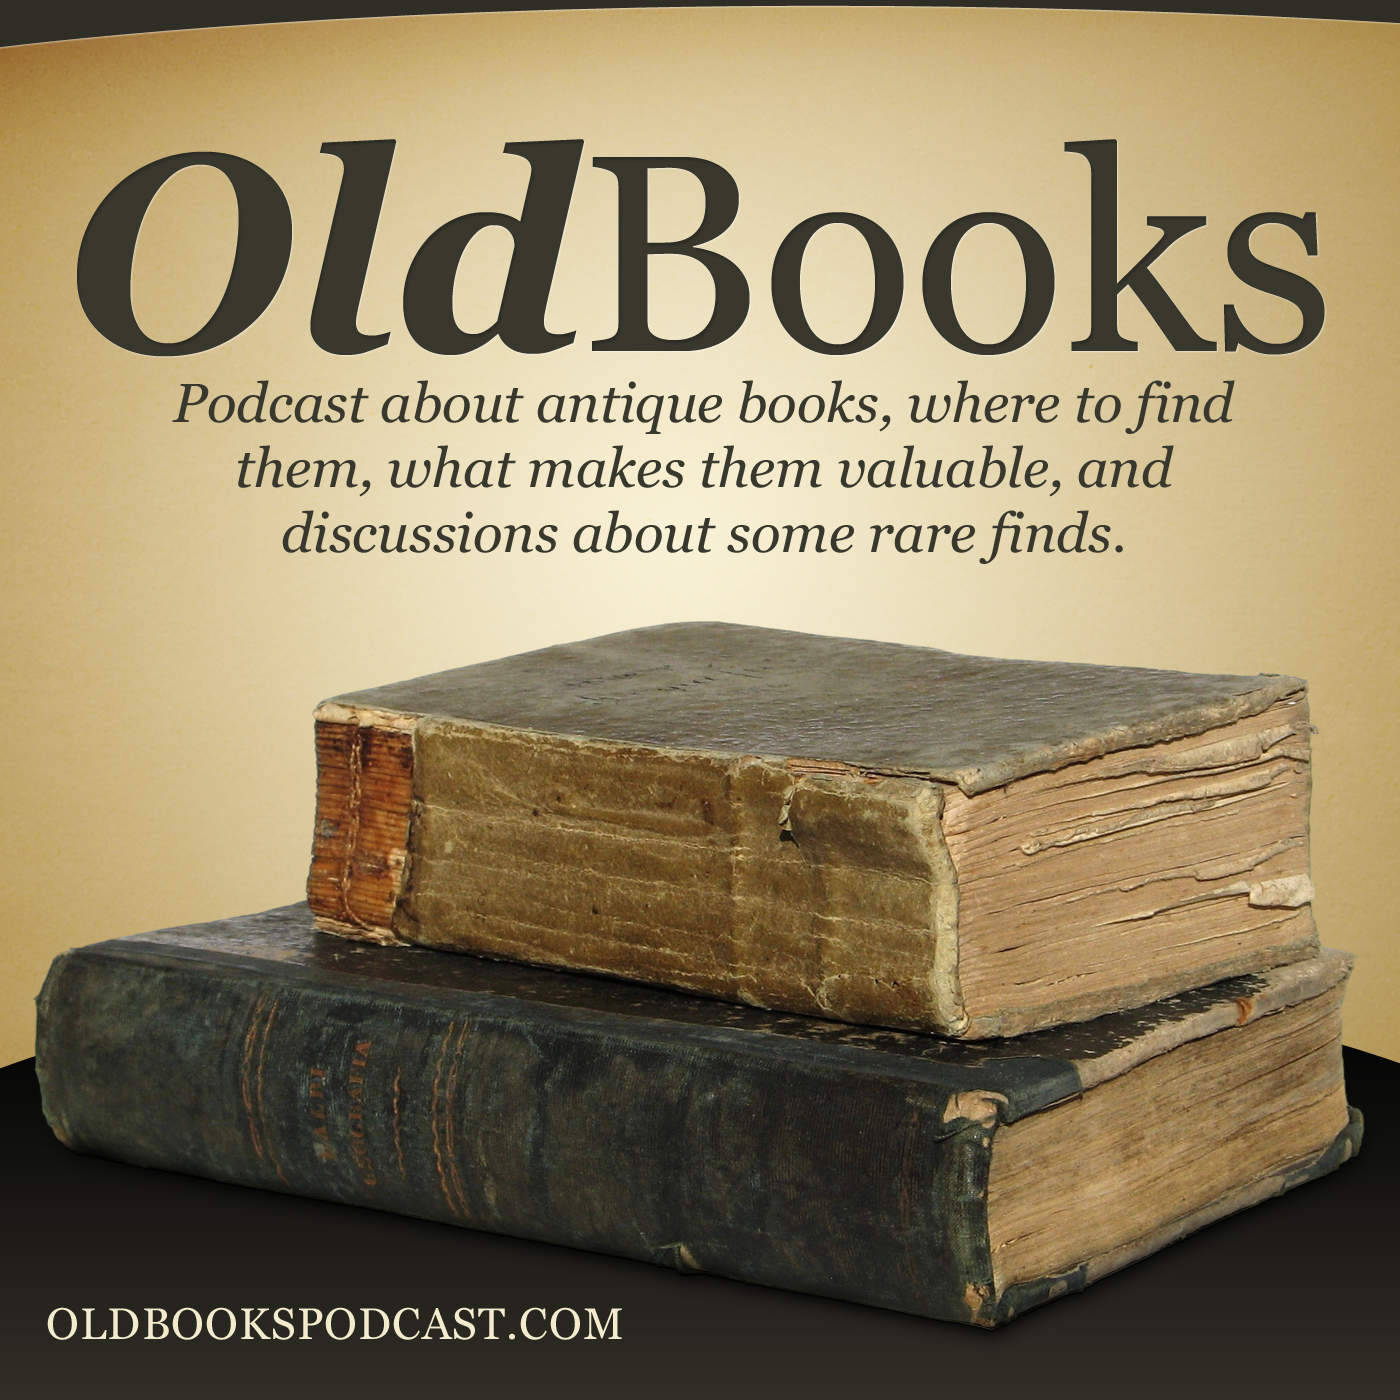 Old Books Podcast